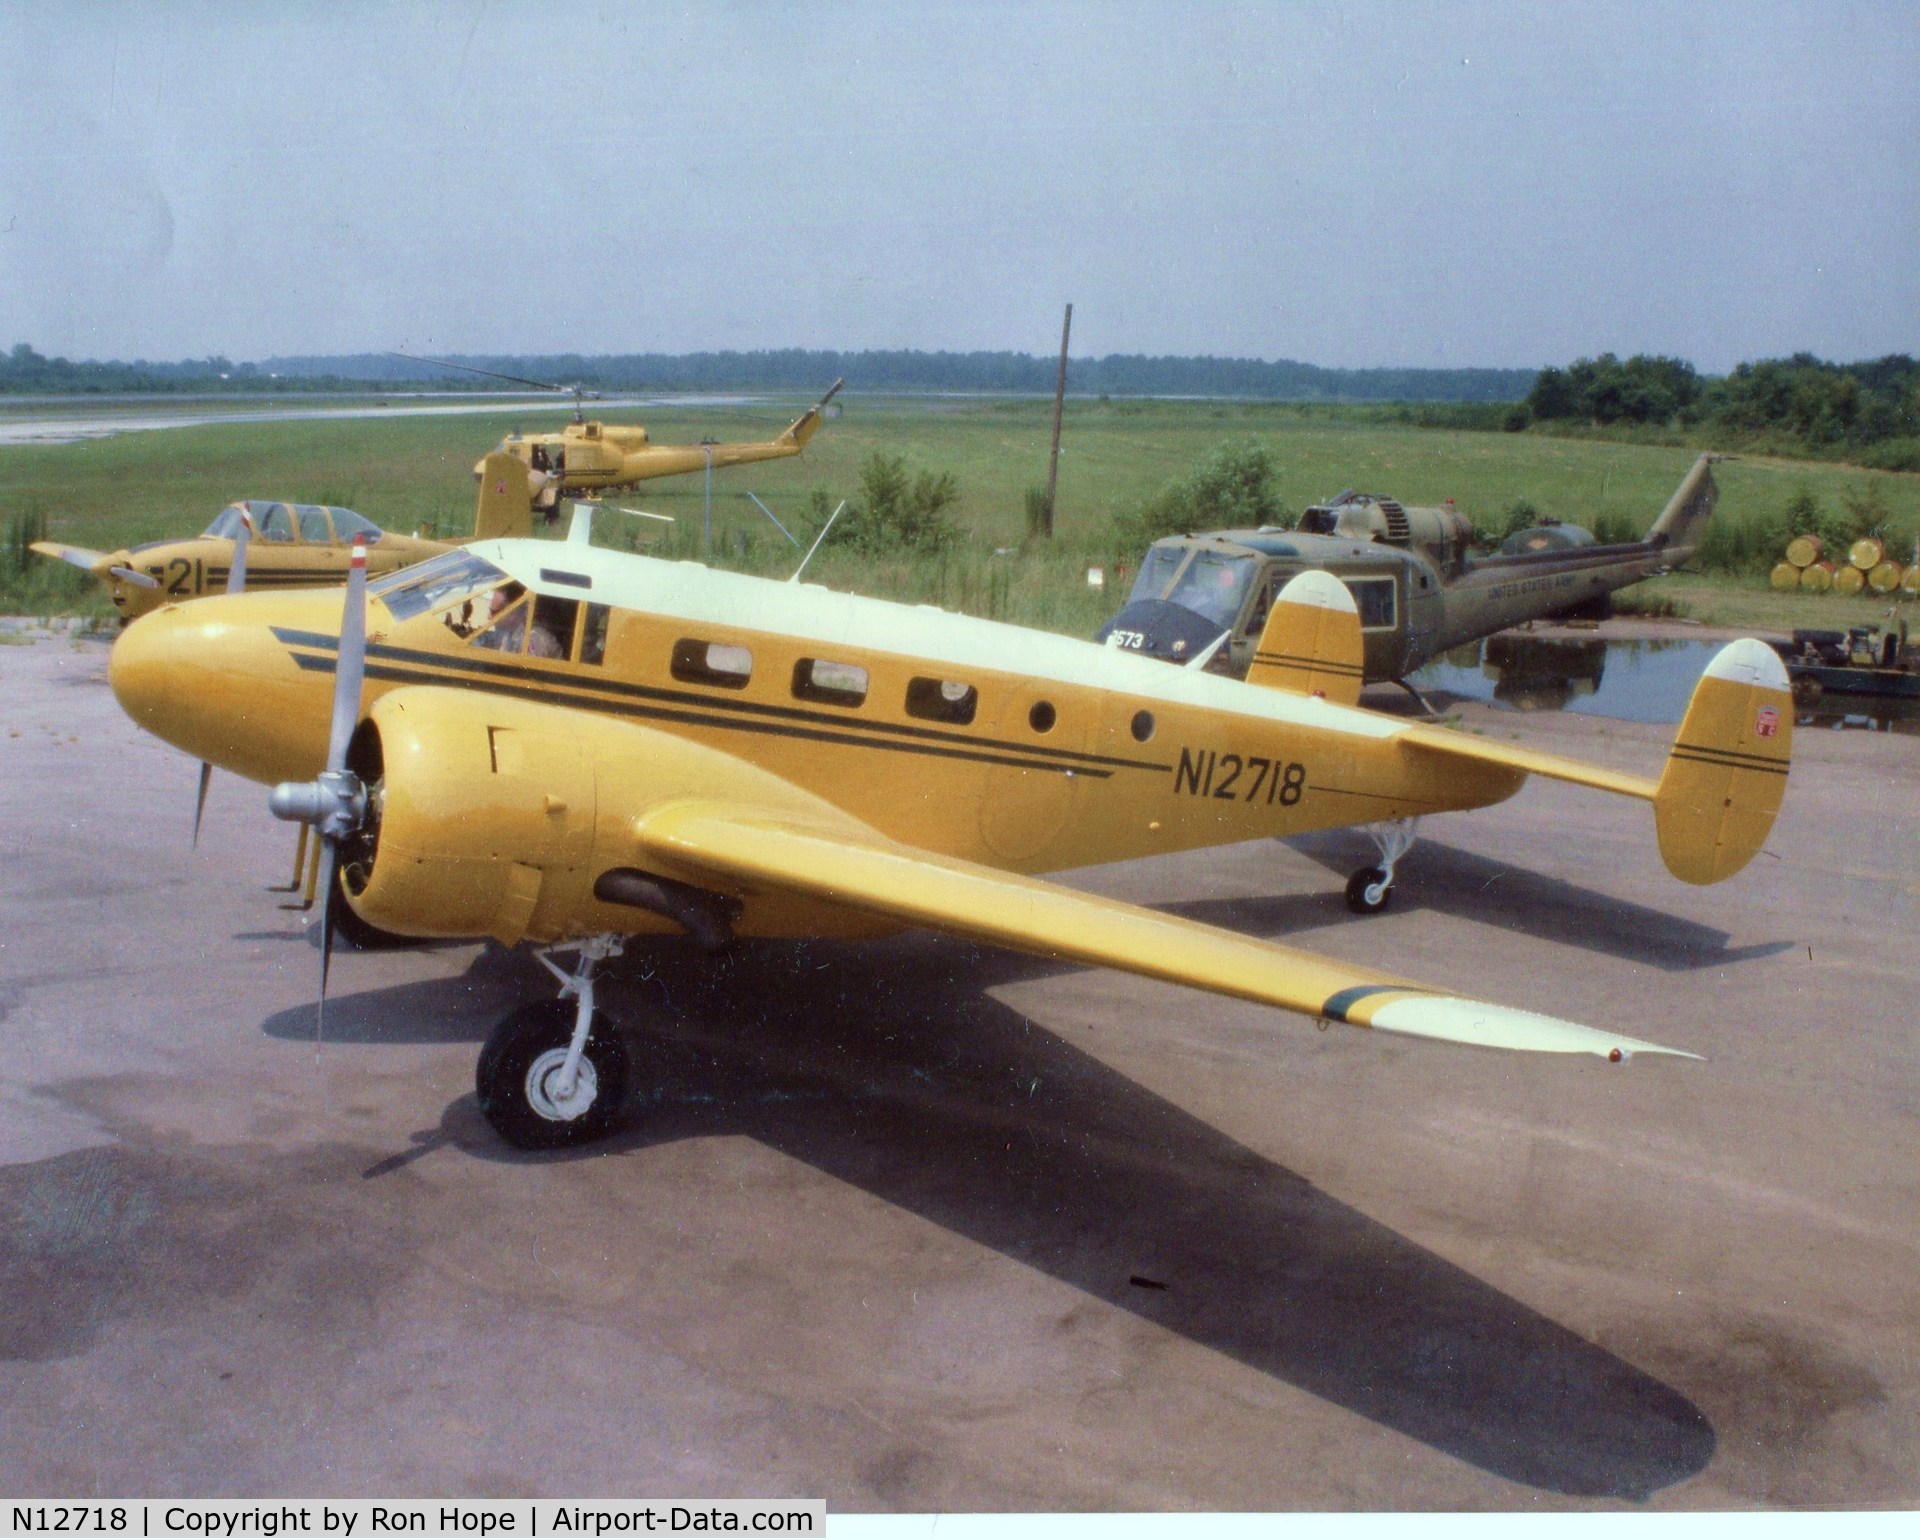 N12718, 1942 Beech UC-45J Expeditor C/N 39750, Picture taken 1978-1979 at NC Forest Service facility in Kinston, NC